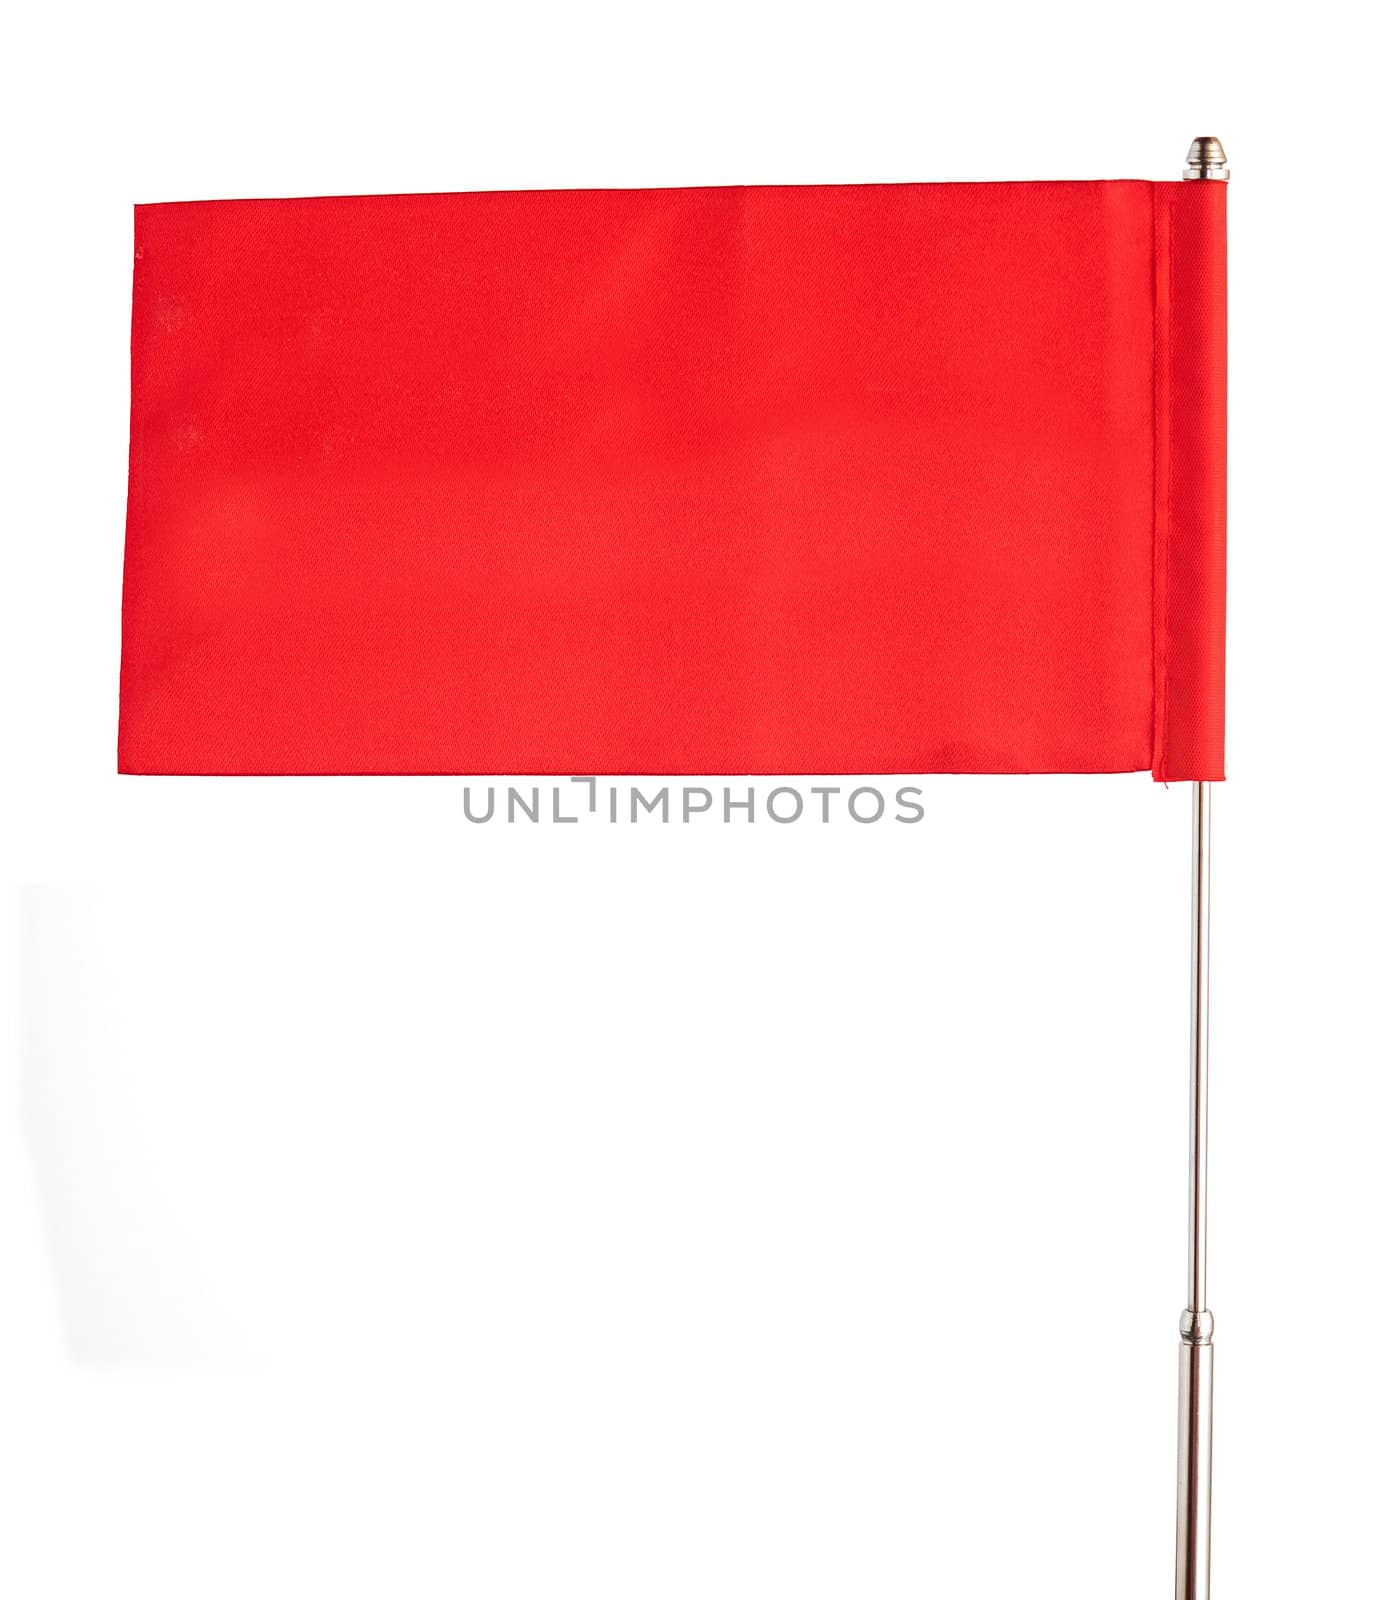 red flag waving on the wind. Isolated over white. Put your own text